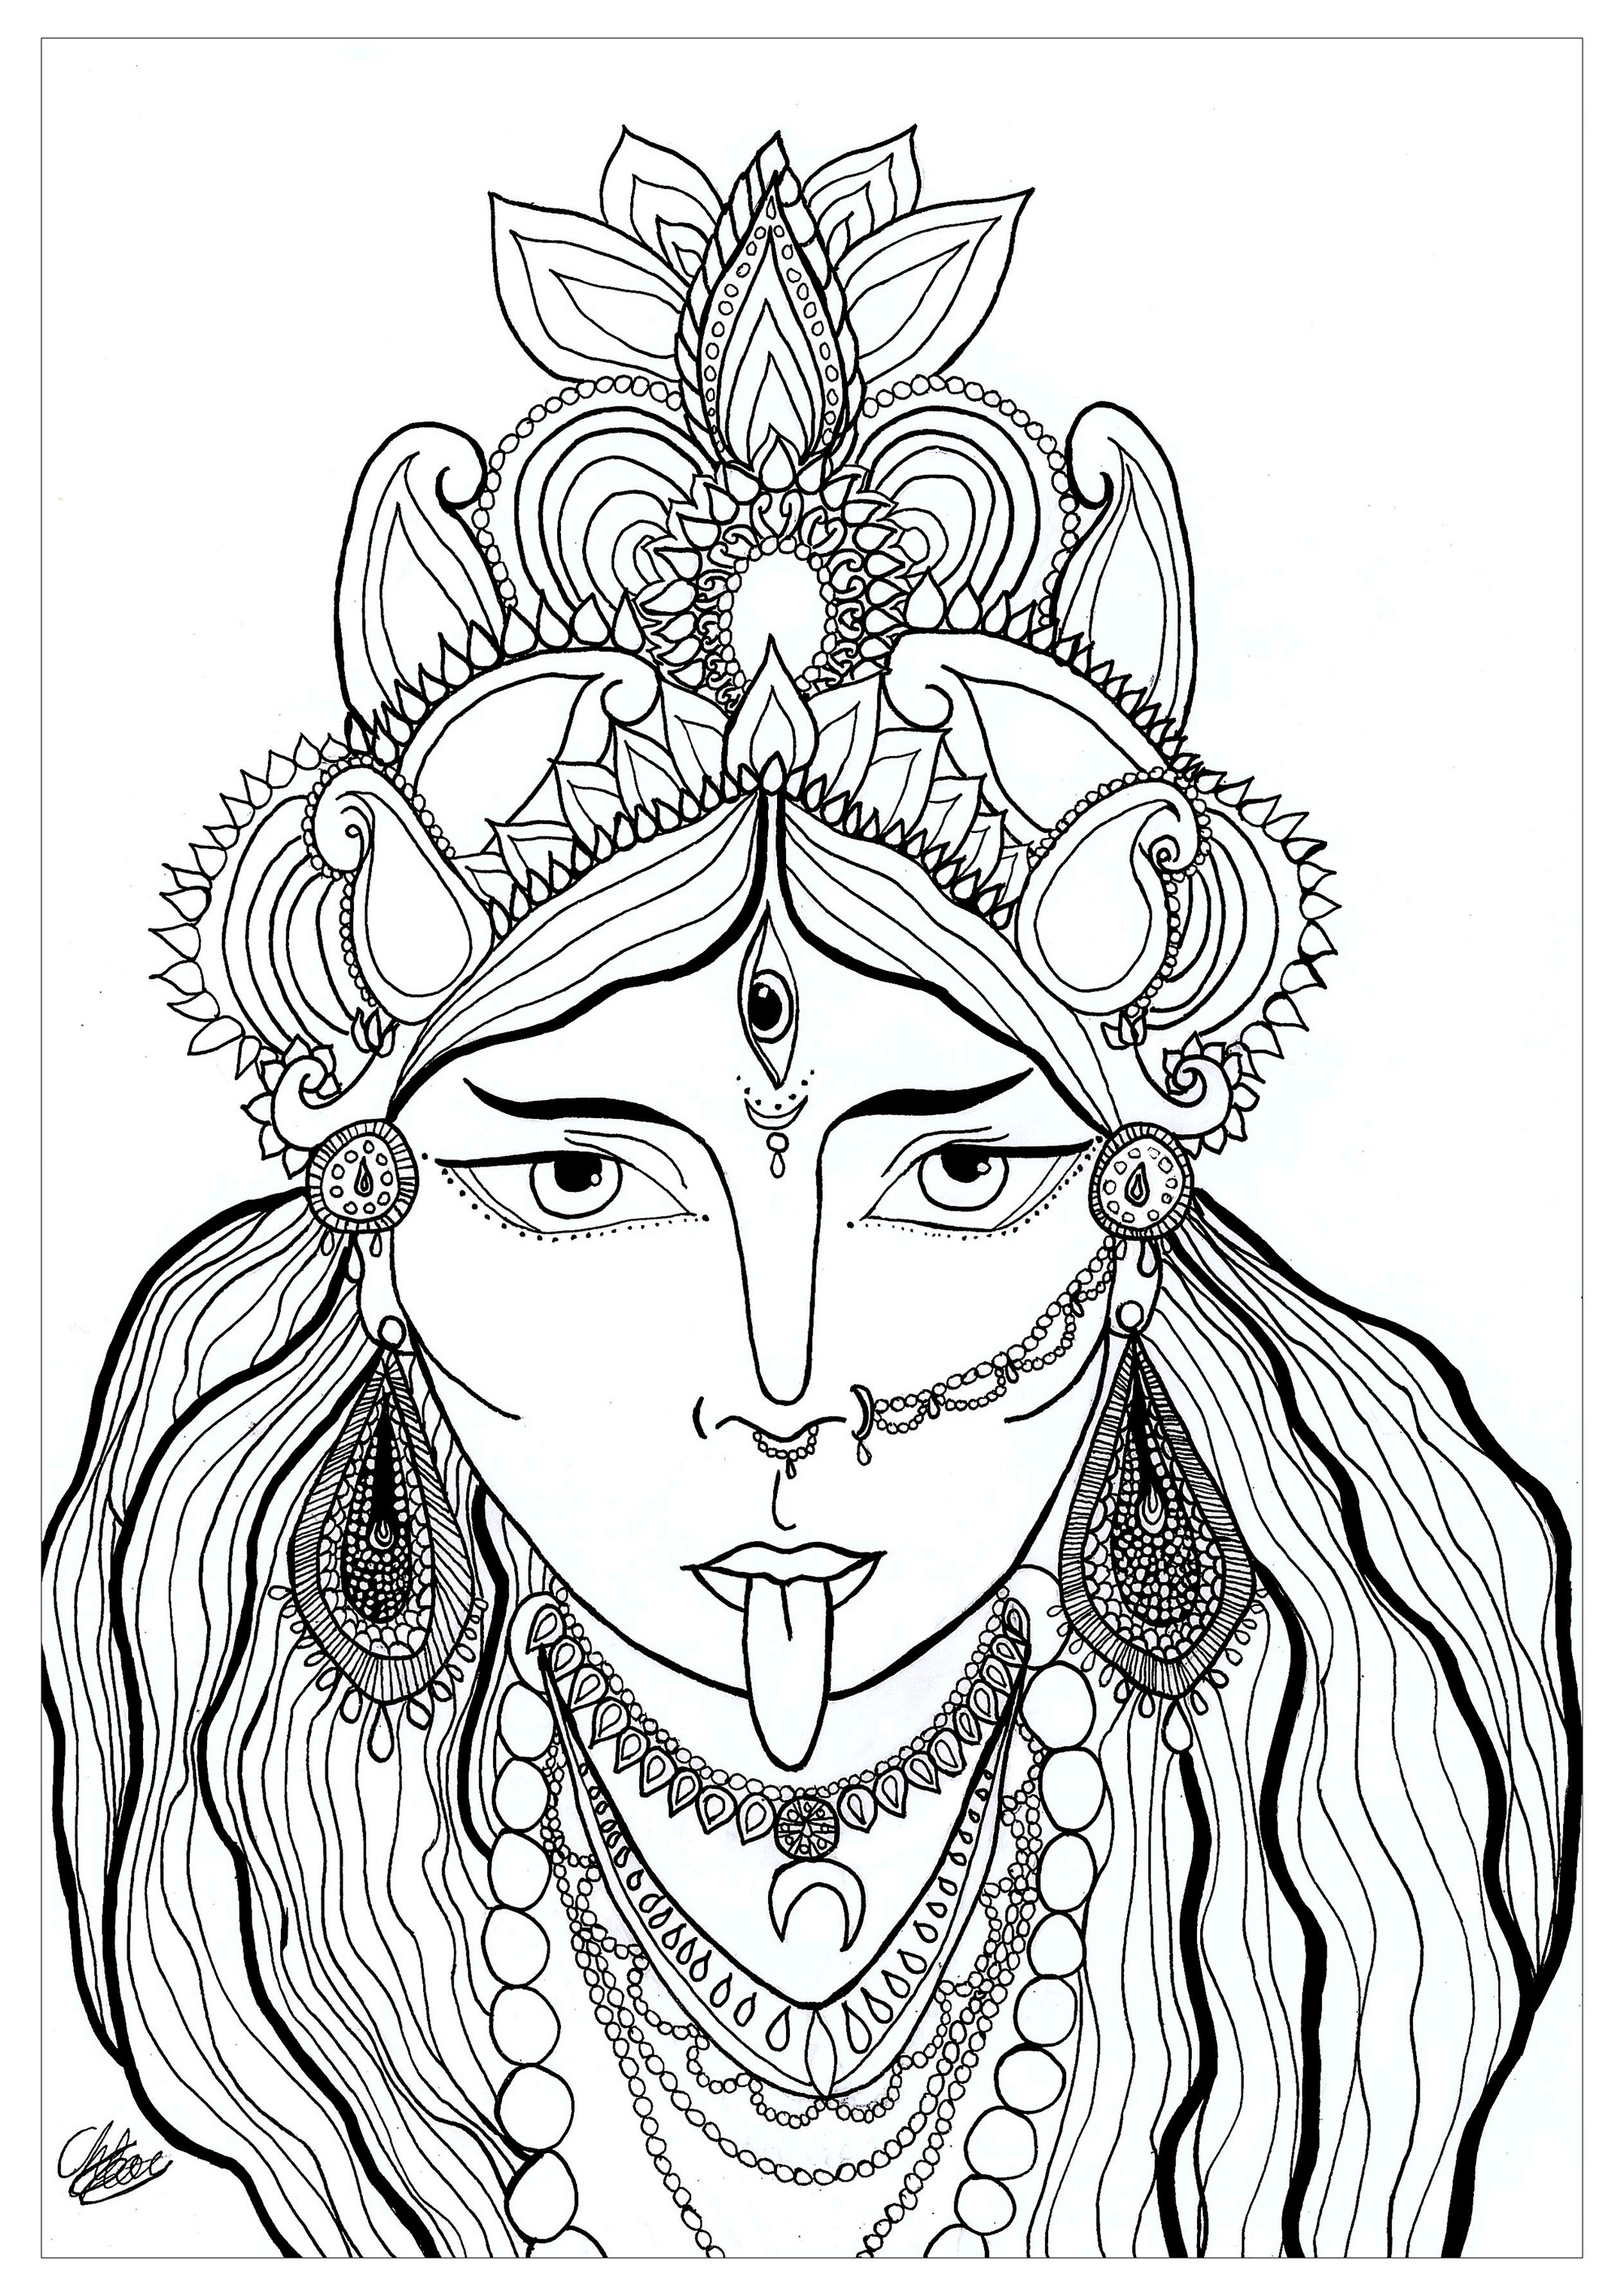 Coloring page of the goddess Kali. Kali is a Hindu goddess worshipped as a manifestation of Shakti, the feminine creative power. Depicted with a terrifying appearance, she symbolizes time, the destruction of evil and transformation, playing a major role in Hindu tradition.